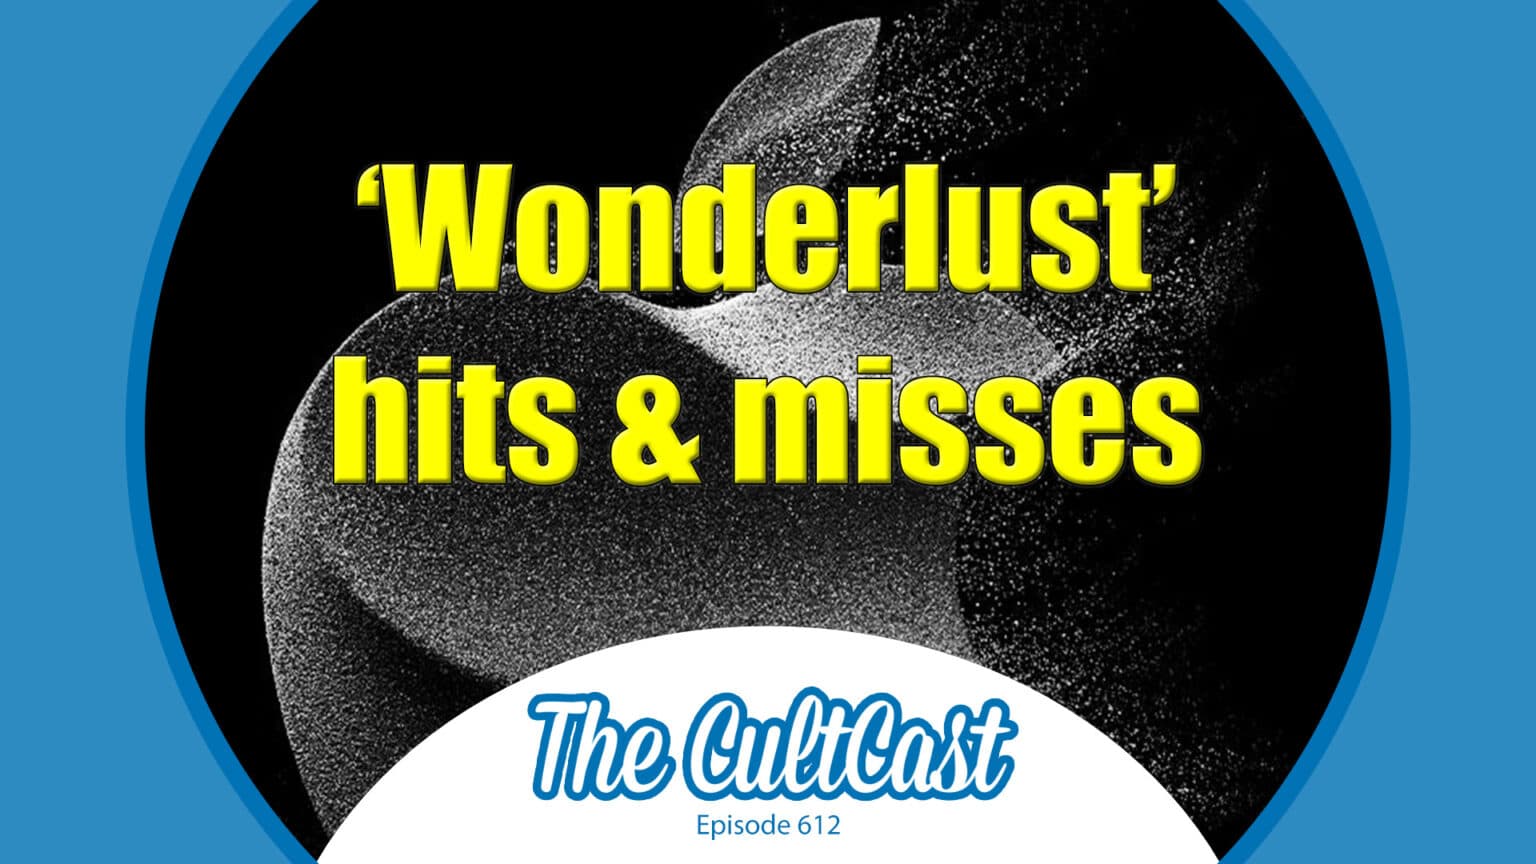 Wonderlust event hits and misses - The CultCast episode 612